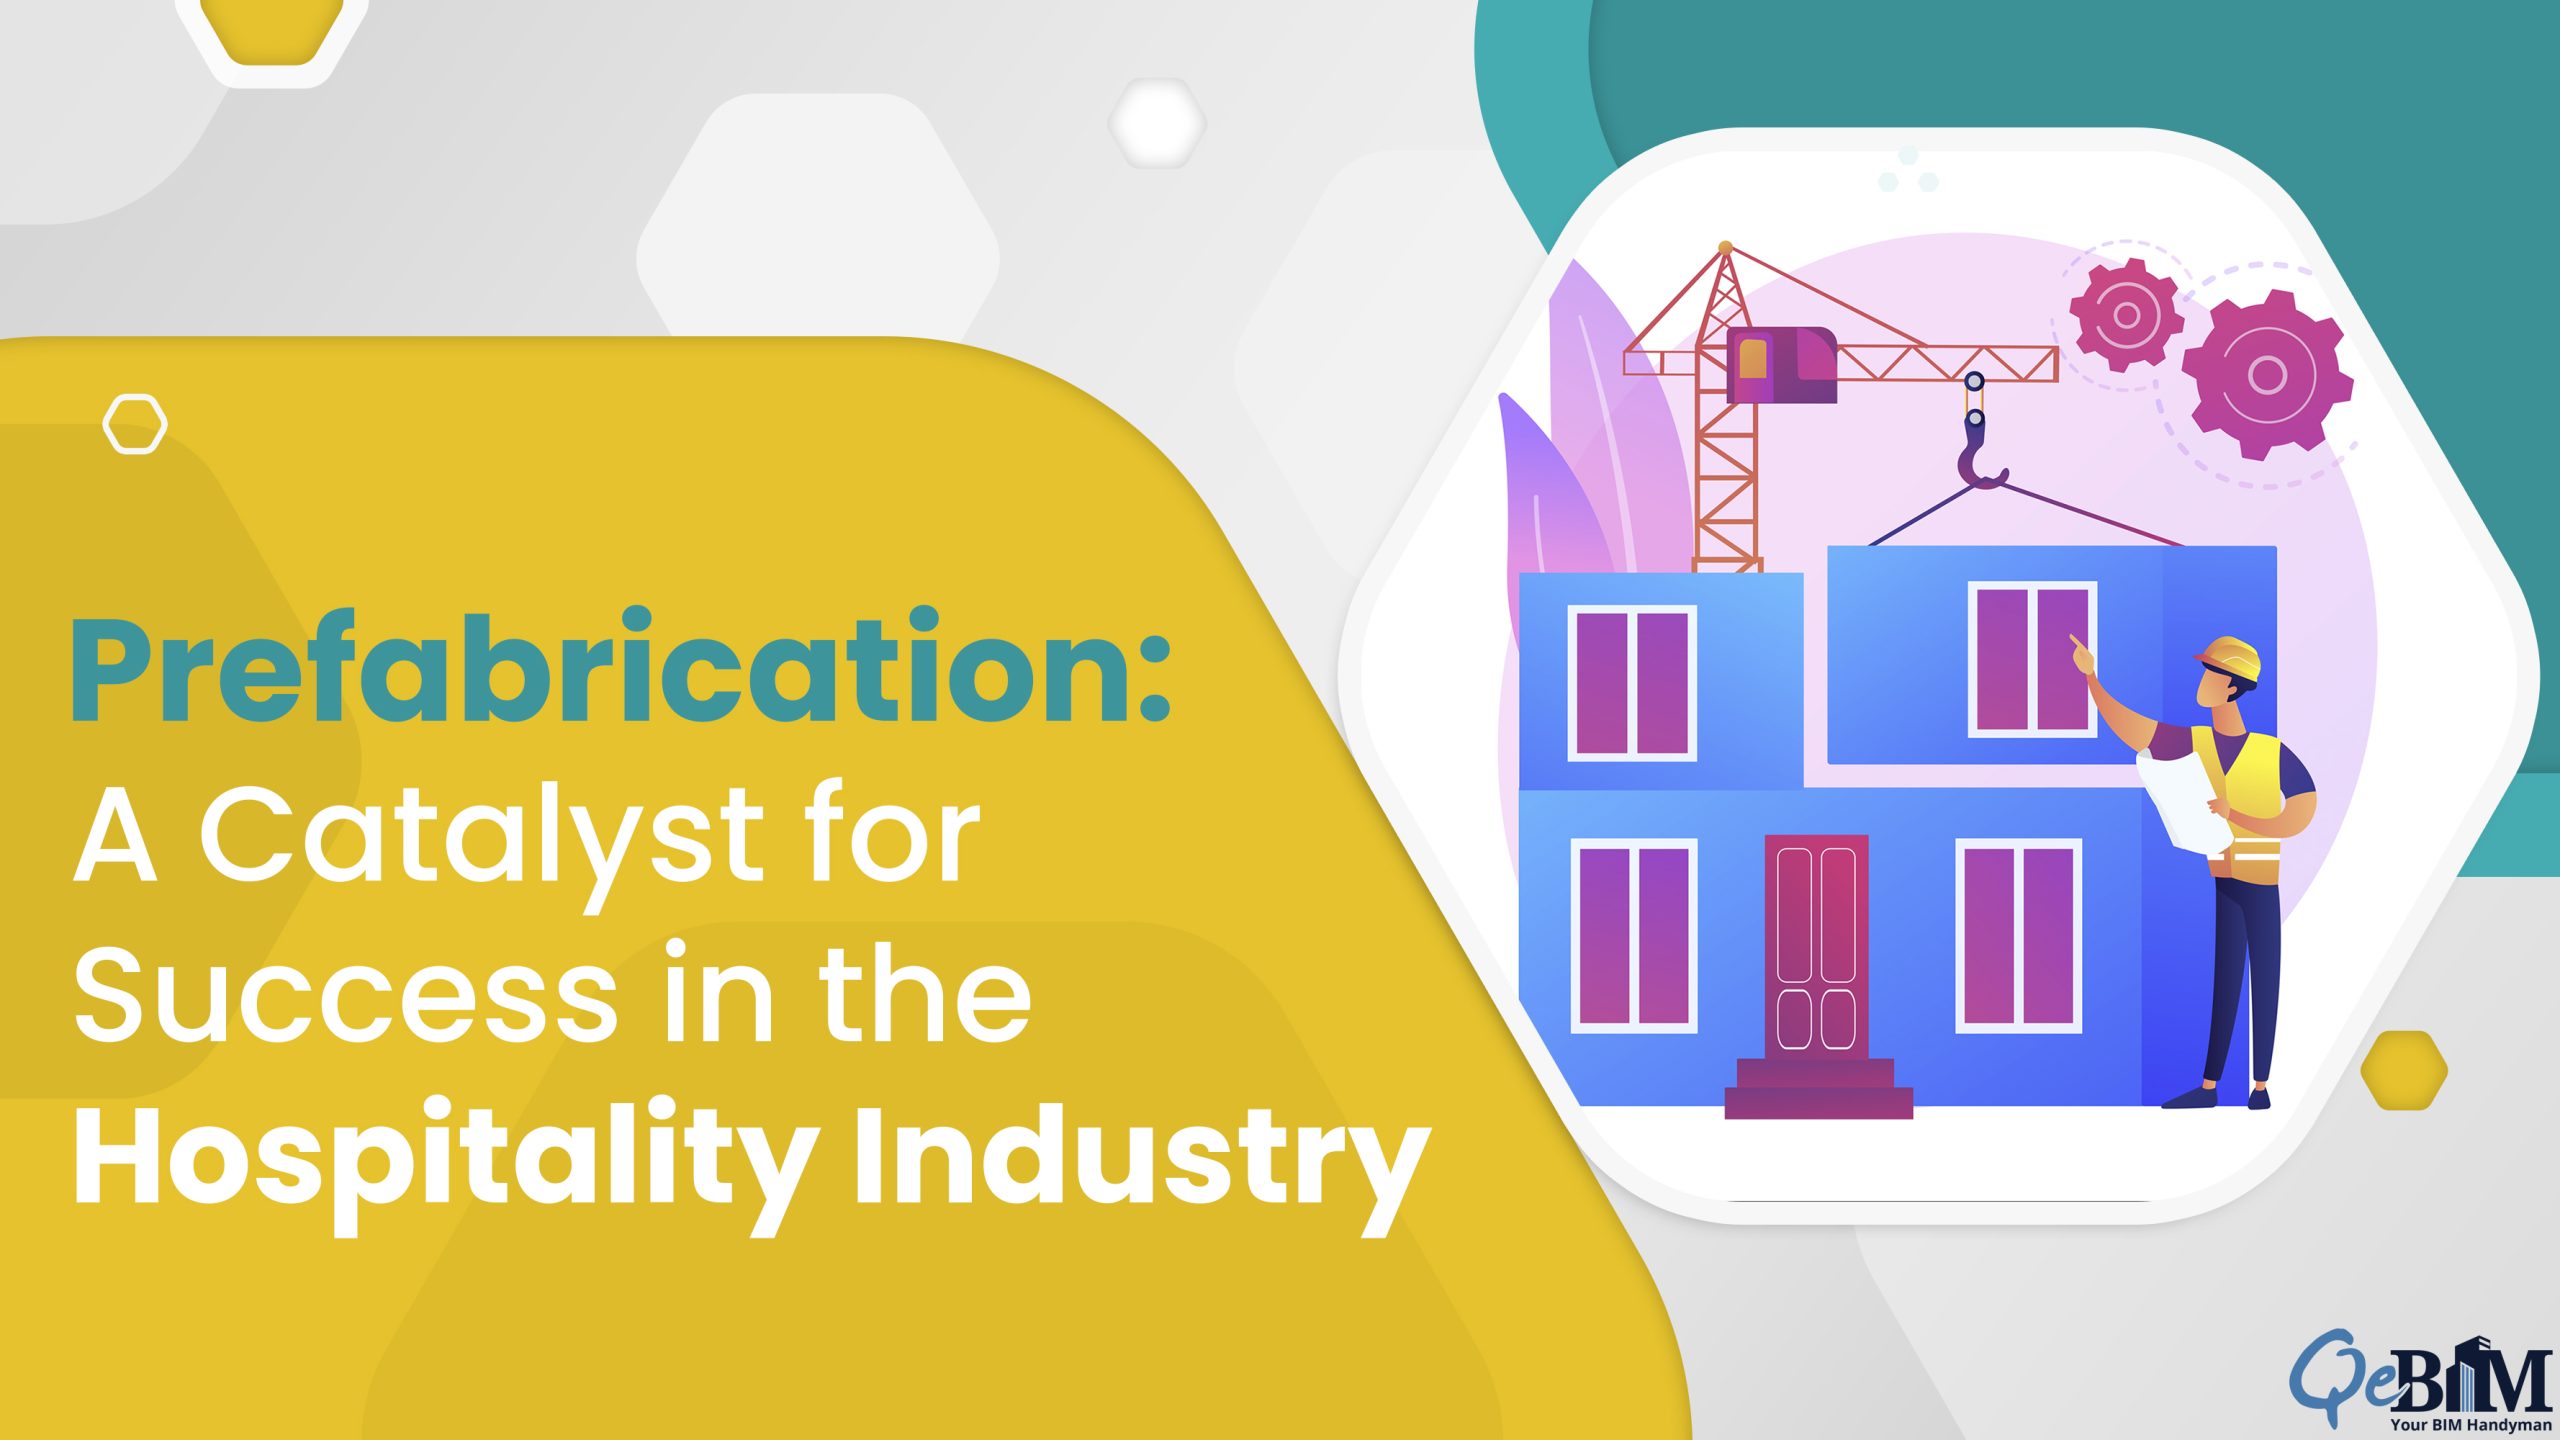 Prefabrication: A Catalyst for Success in the Hospitality Industry